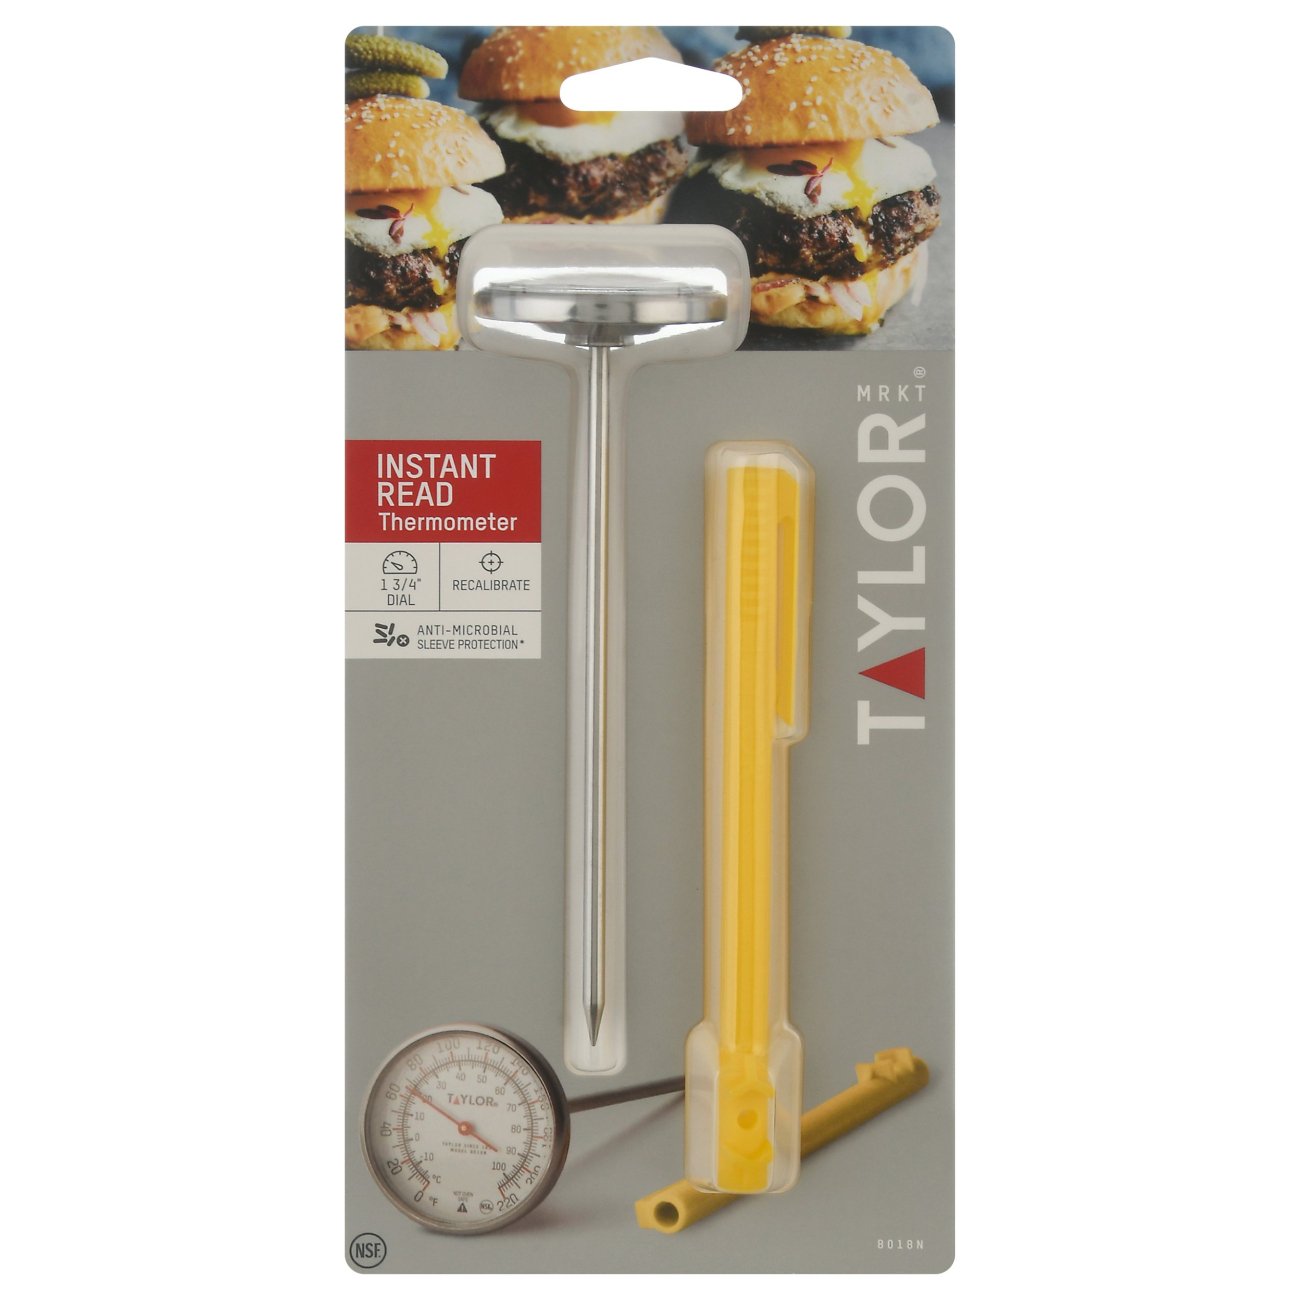 Taylor Meat Dial Kitchen Thermometer